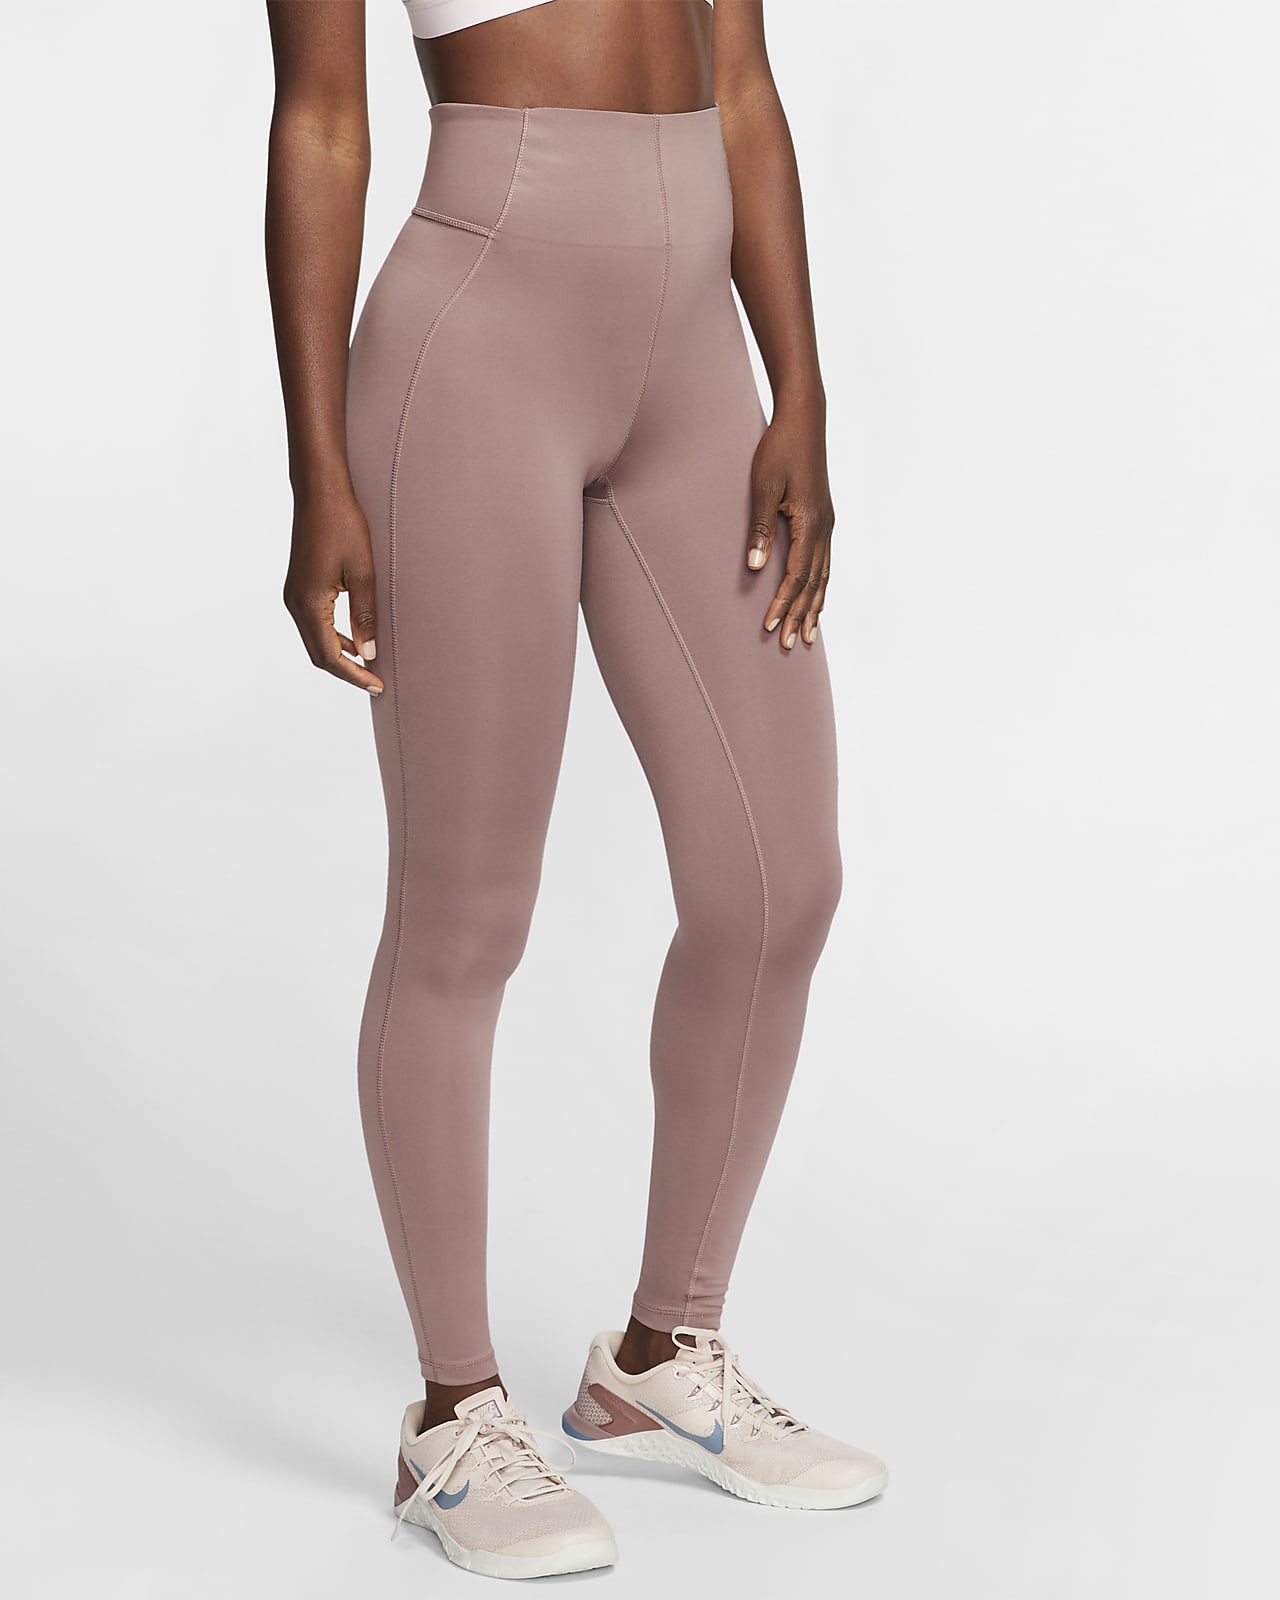 nike sculpture victory women's training tights